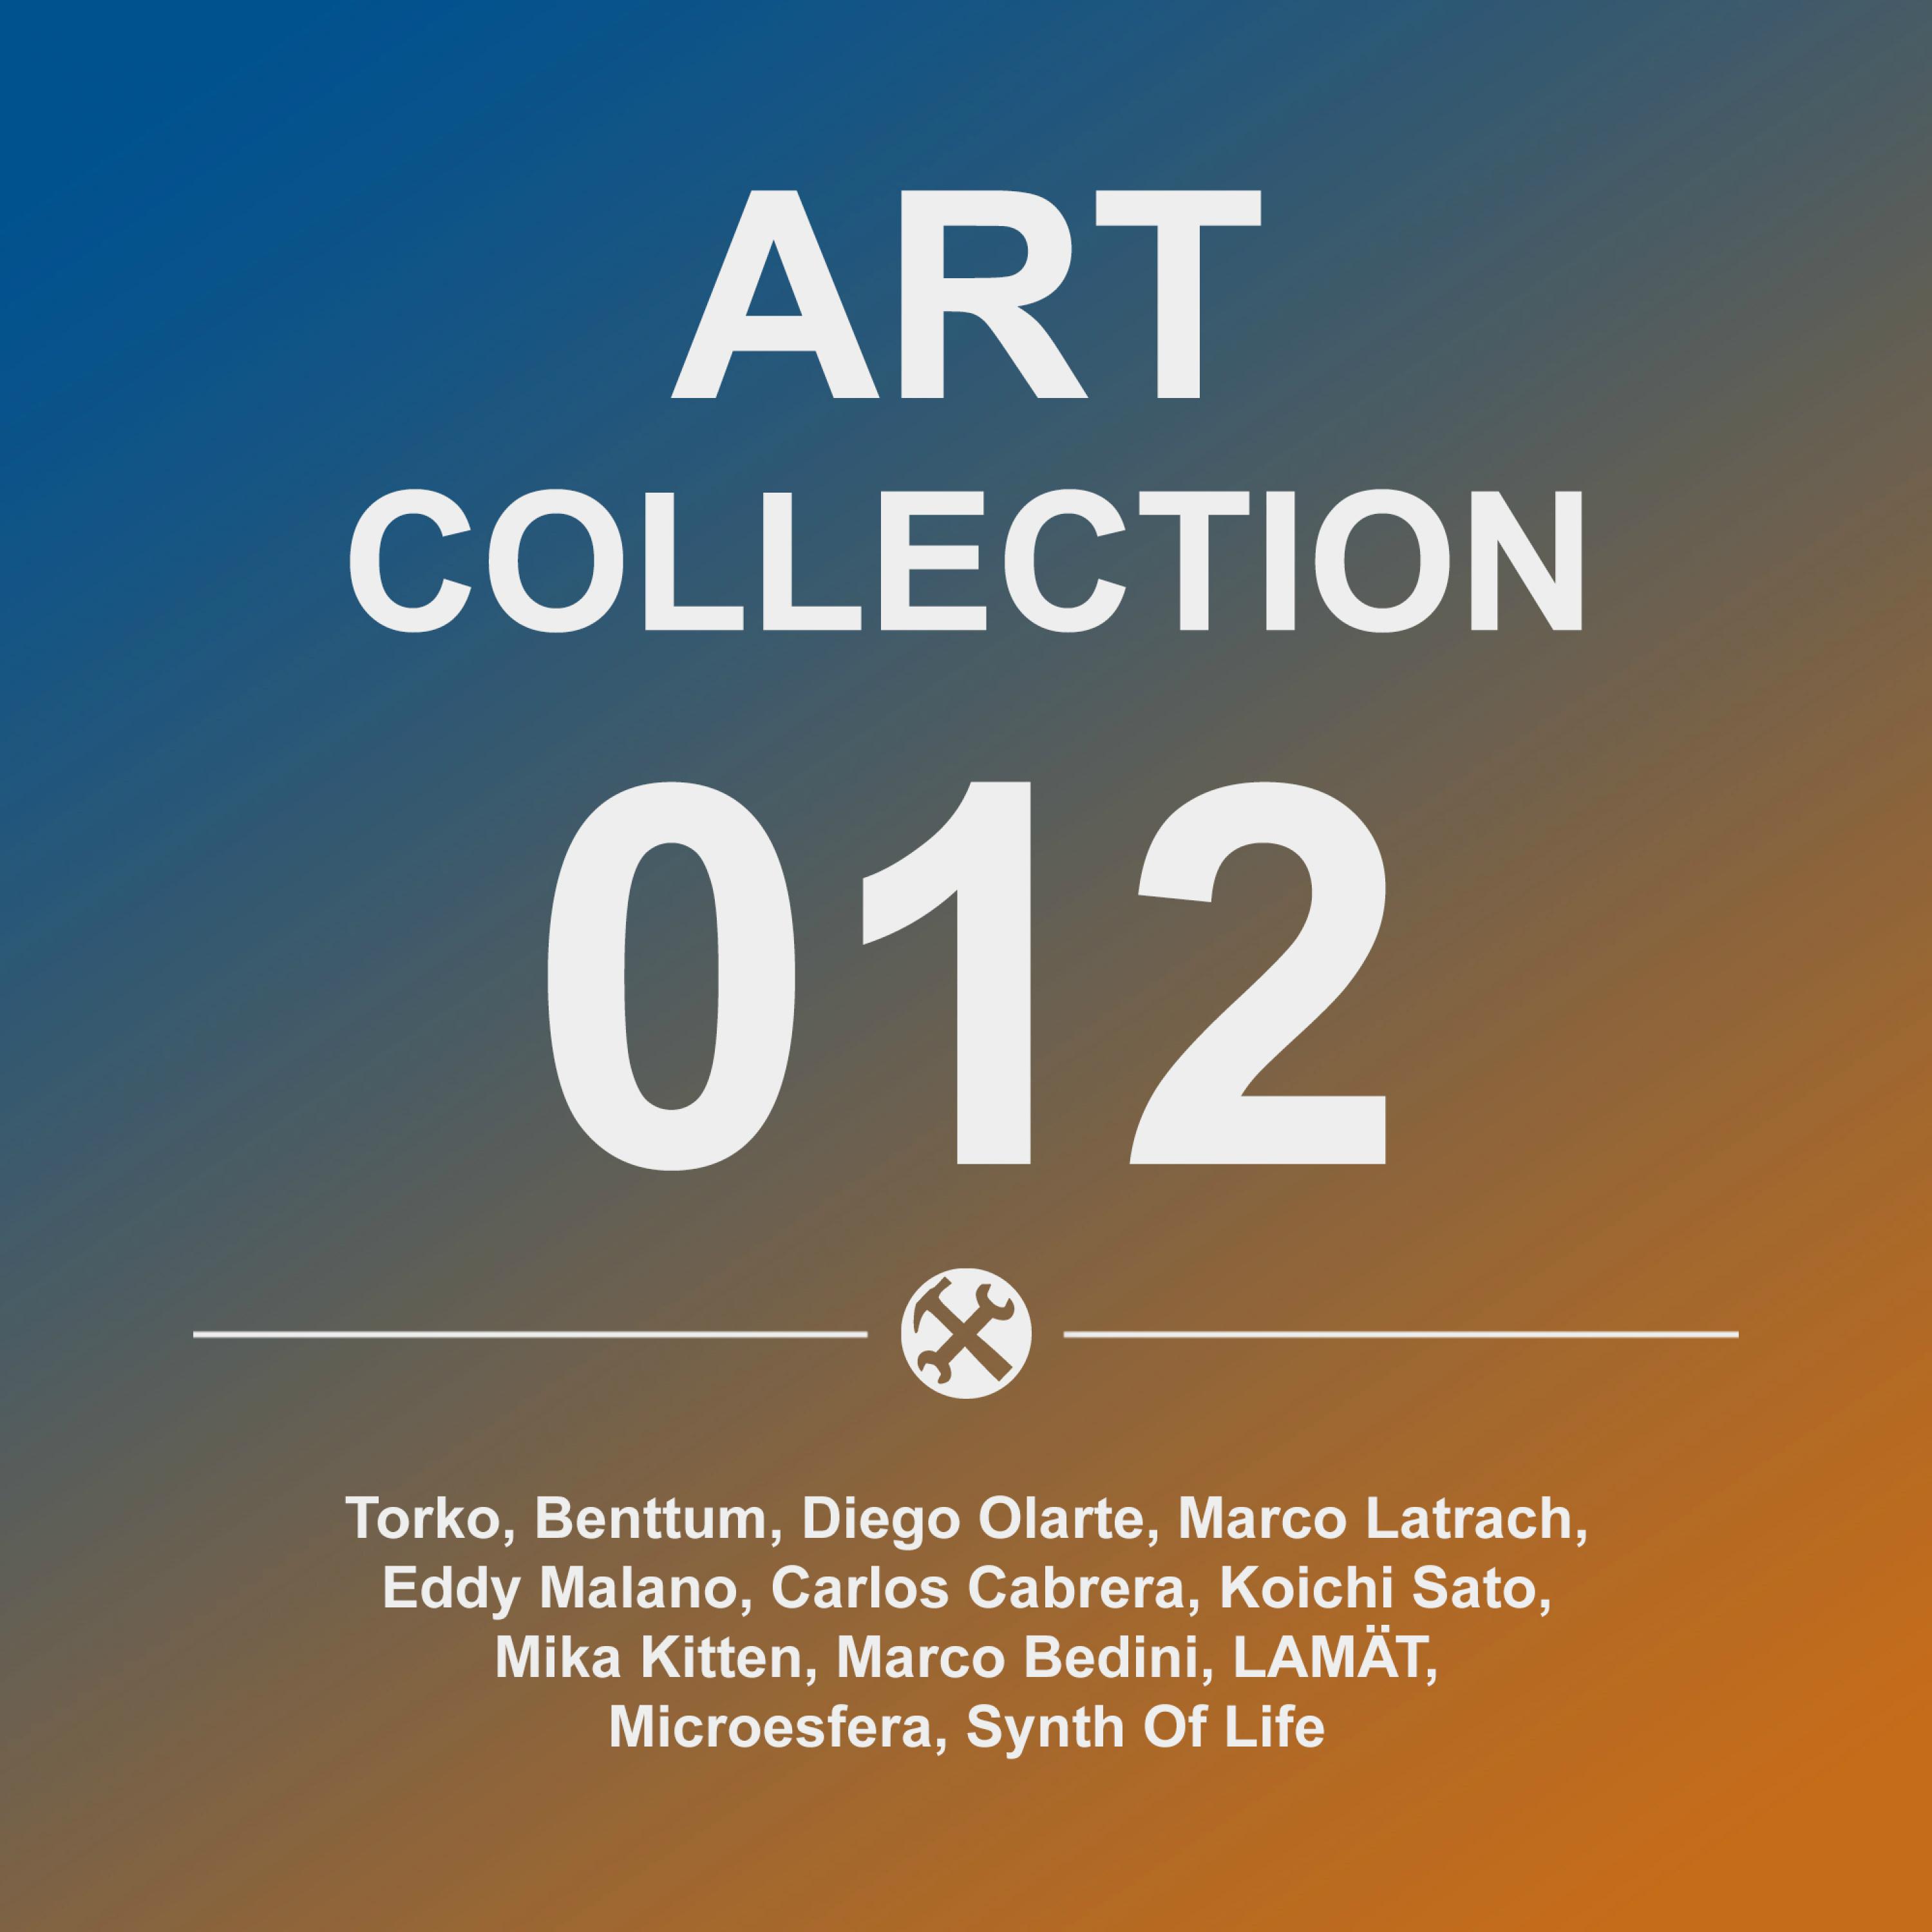 ART Collection, Vol. 012